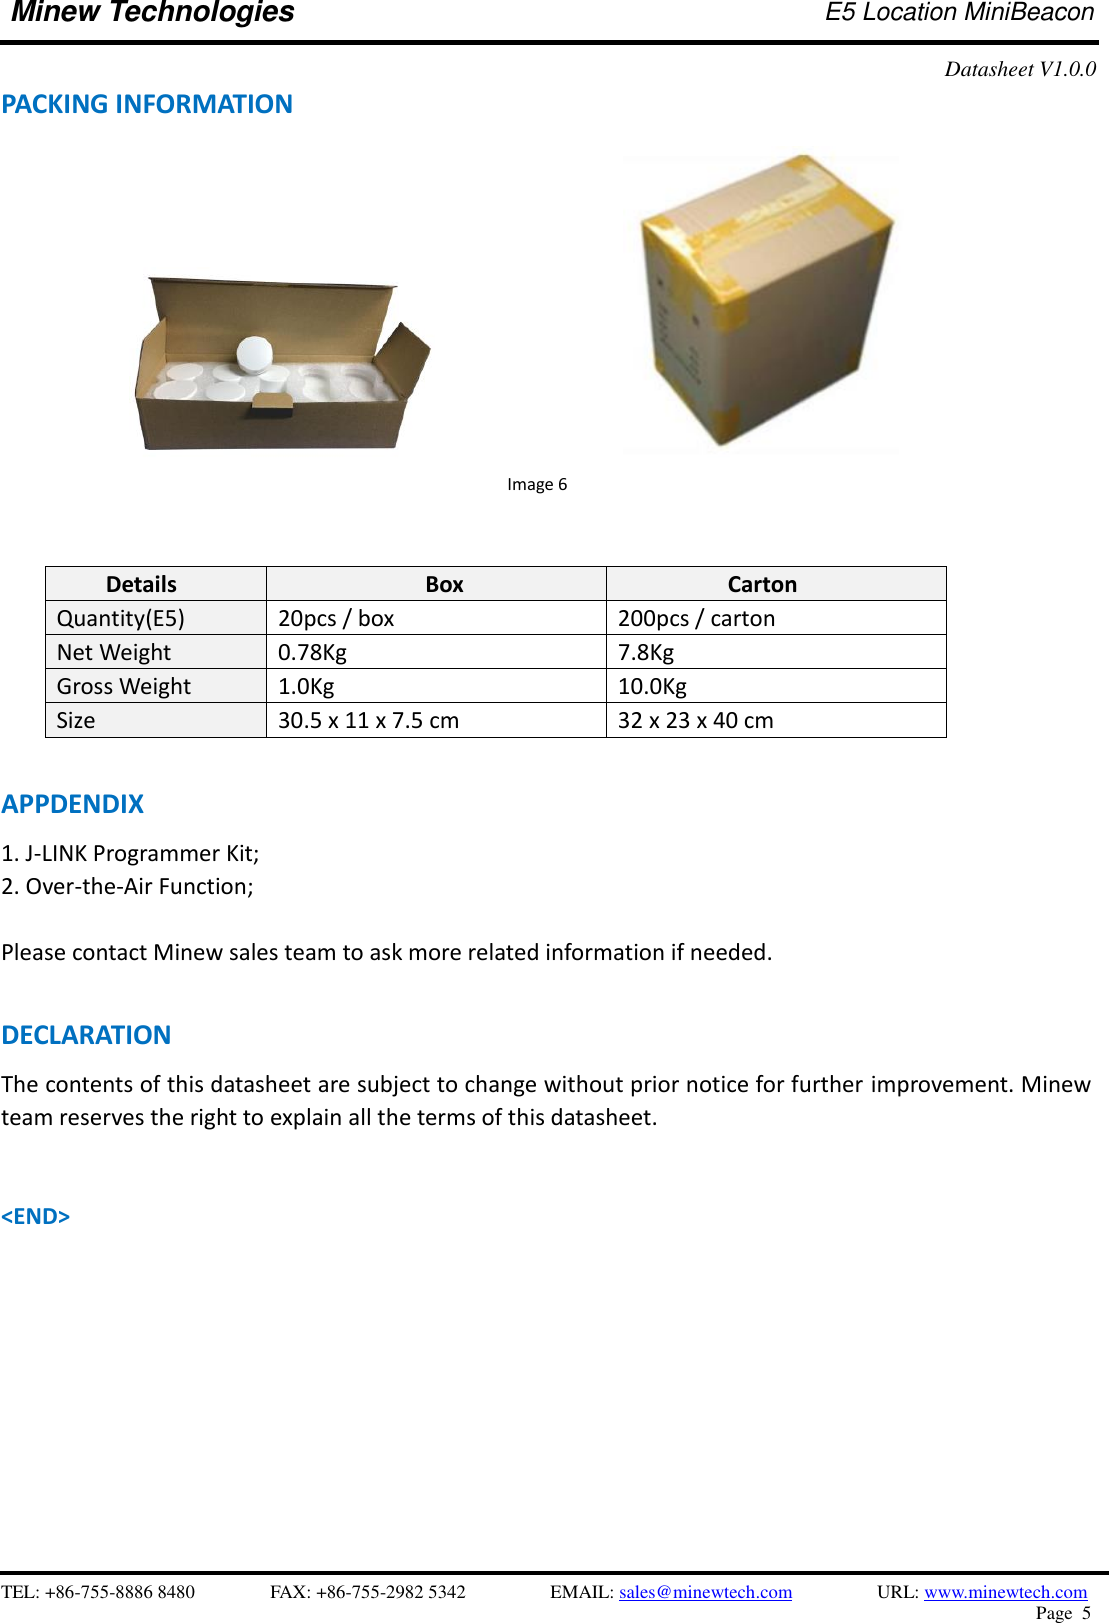    TEL: +86-755-8886 8480              FAX: +86-755-2982 5342              EMAIL: sales@minewtech.com           URL: www.minewtech.com Page  5  Minew Technologies E5 Location MiniBeacon   Datasheet V1.0.0   PACKING INFORMATION                             Image 6   Details Box Carton Quantity(E5) 20pcs / box 200pcs / carton Net Weight 0.78Kg 7.8Kg Gross Weight 1.0Kg 10.0Kg Size 30.5 x 11 x 7.5 cm 32 x 23 x 40 cm  APPDENDIX 1. J-LINK Programmer Kit;   2. Over-the-Air Function;  Please contact Minew sales team to ask more related information if needed.  DECLARATION The contents of this datasheet are subject to change without prior notice for further improvement. Minew team reserves the right to explain all the terms of this datasheet.   &lt;END&gt; 